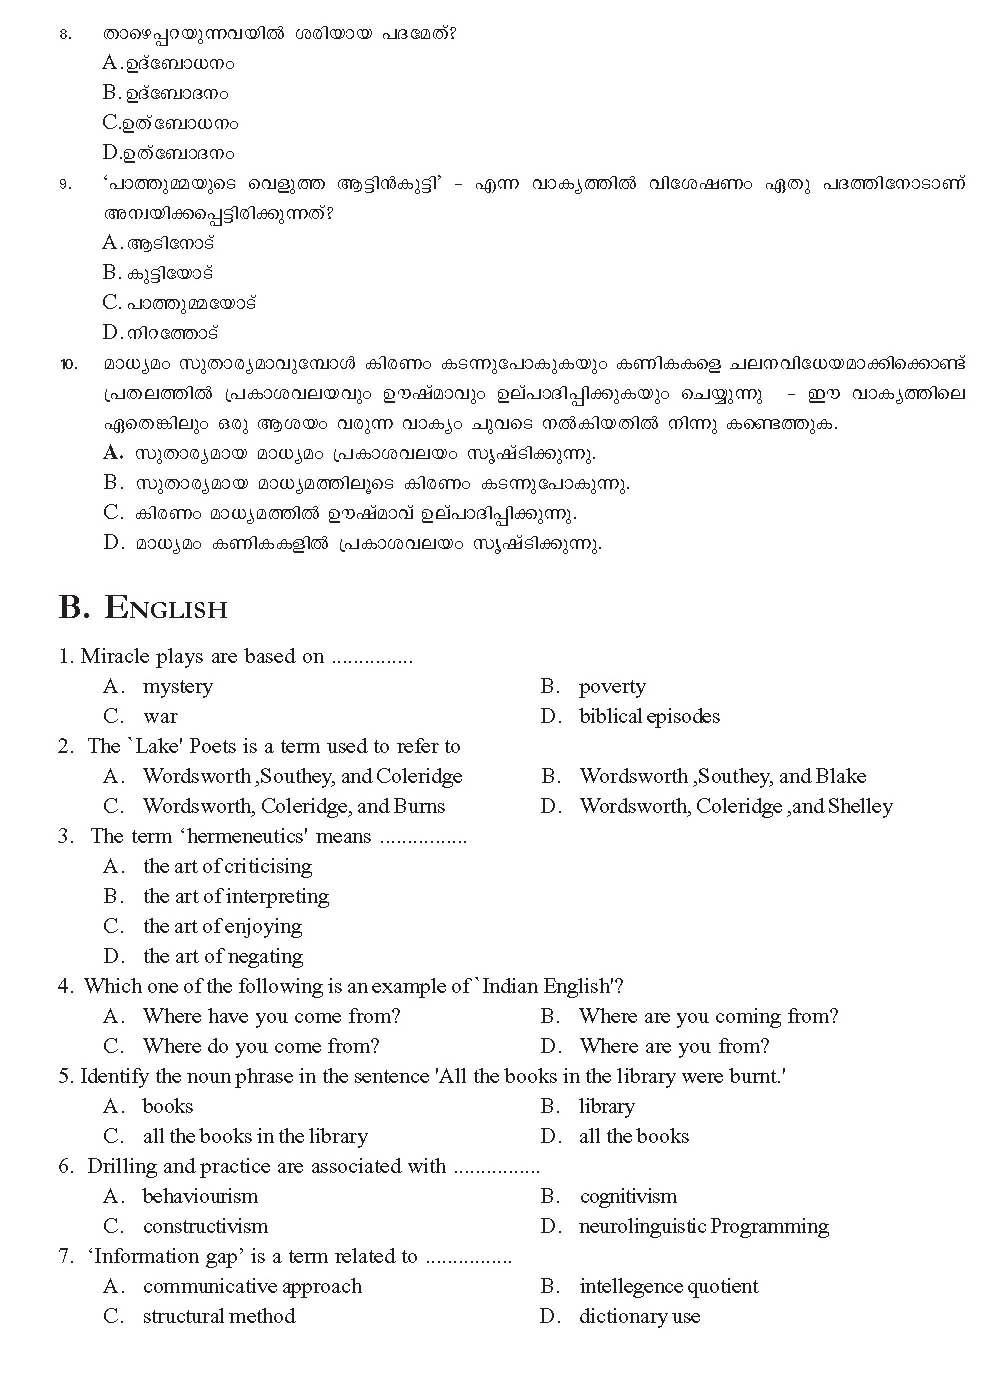 KTET Category III Paper III Language I Question Paper with Answers 2012 2